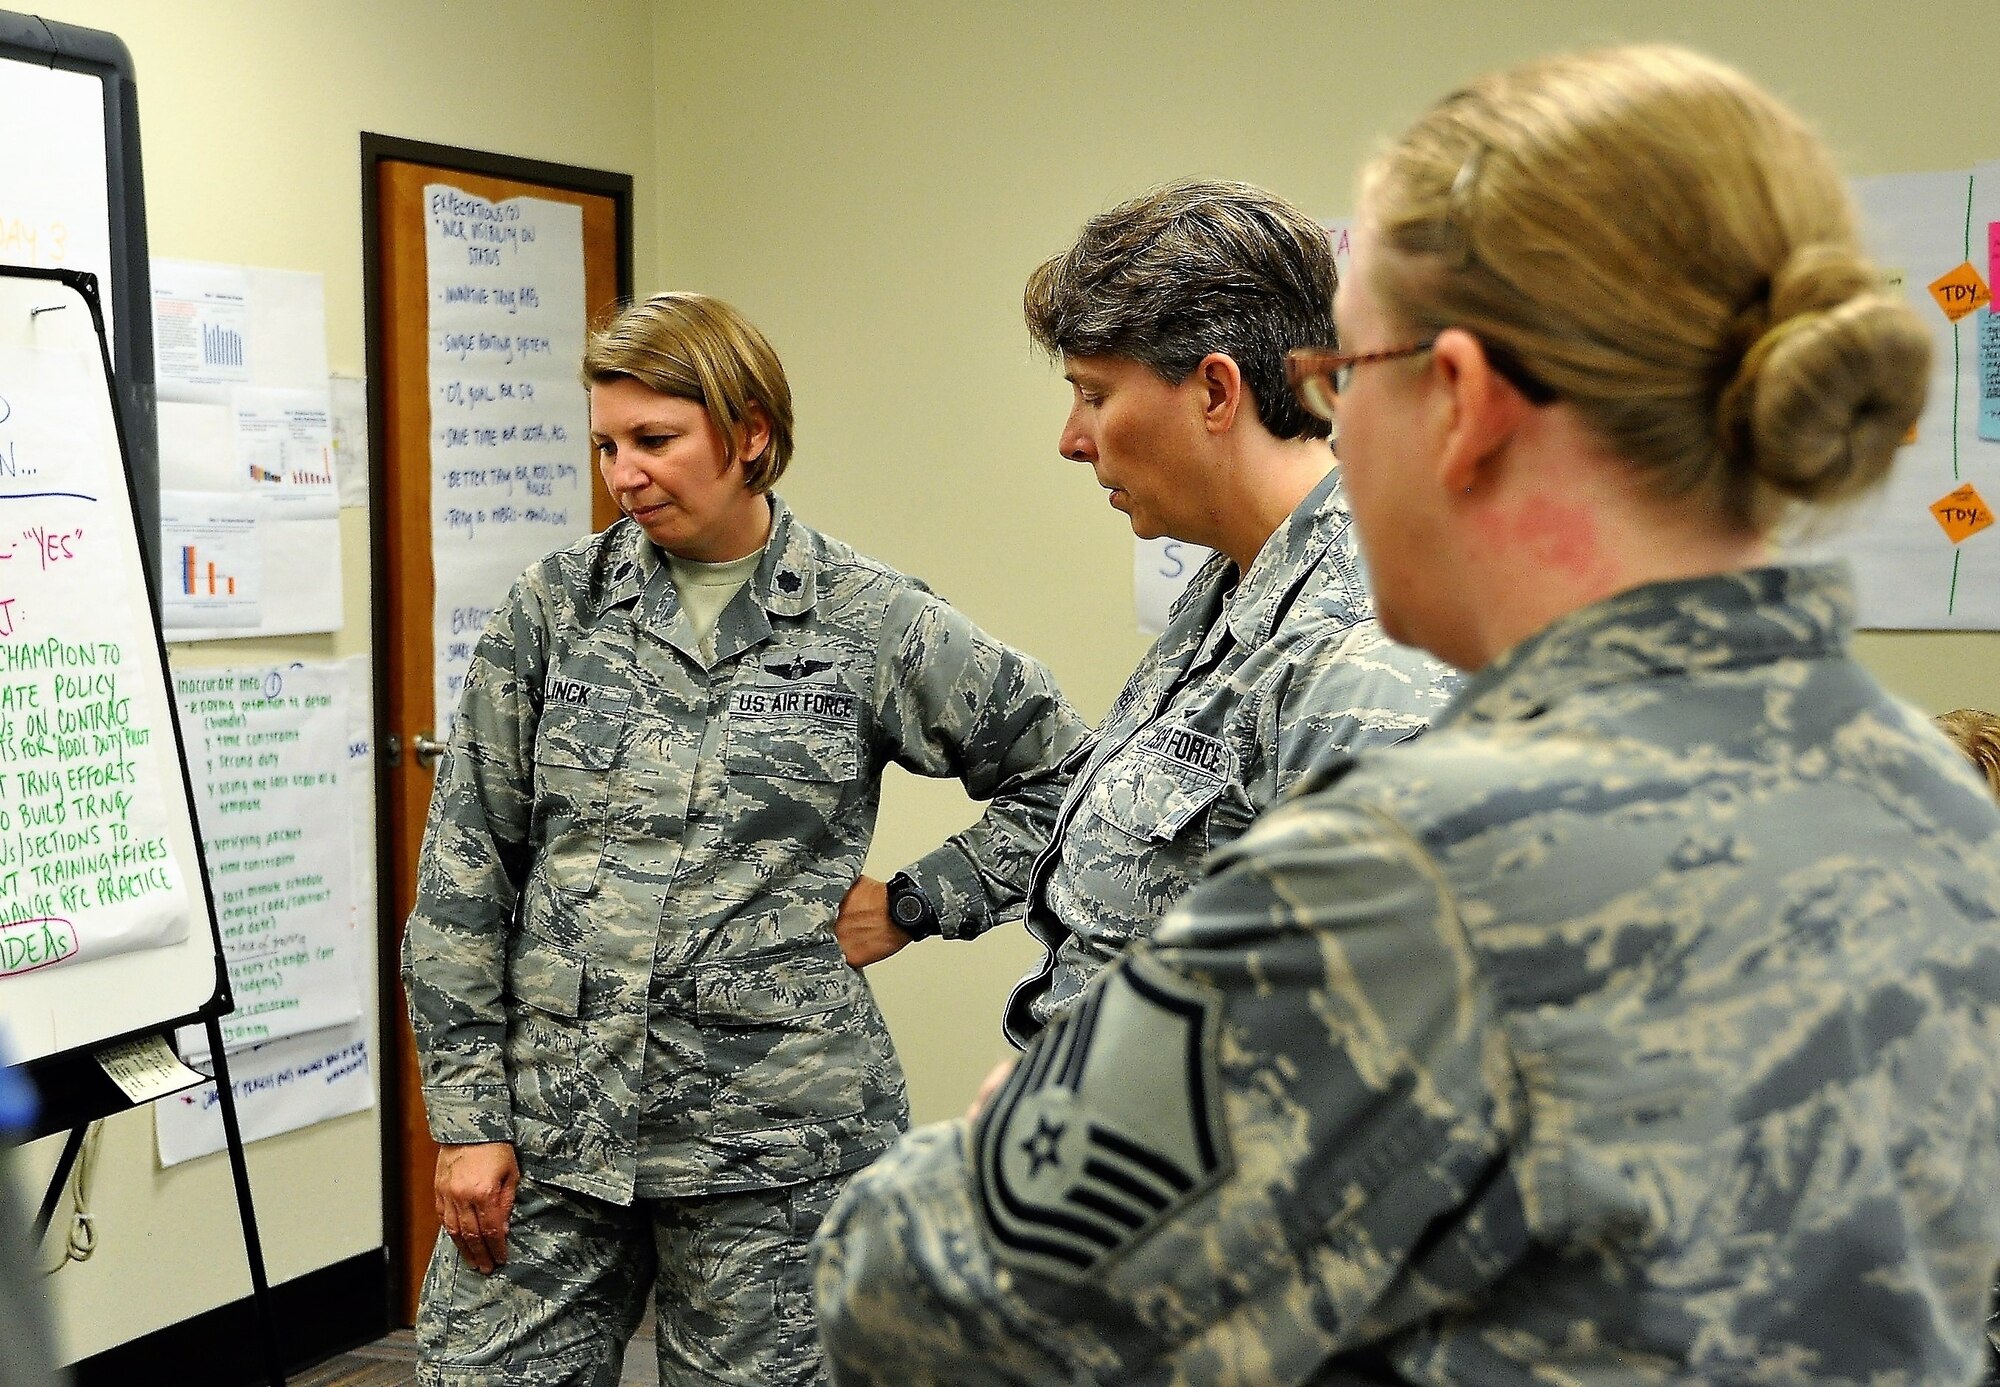 340th FTG CPI manager, Lt. Col. Sara Linck, Master Sgt. Amy Whitman-Rector (C) and Master Sgt. Latisha Melendez survey outbrief statements during the recent Financial Management travel voucher process CPI event. (U.S. Air Force photo by Janis El Shabazz)